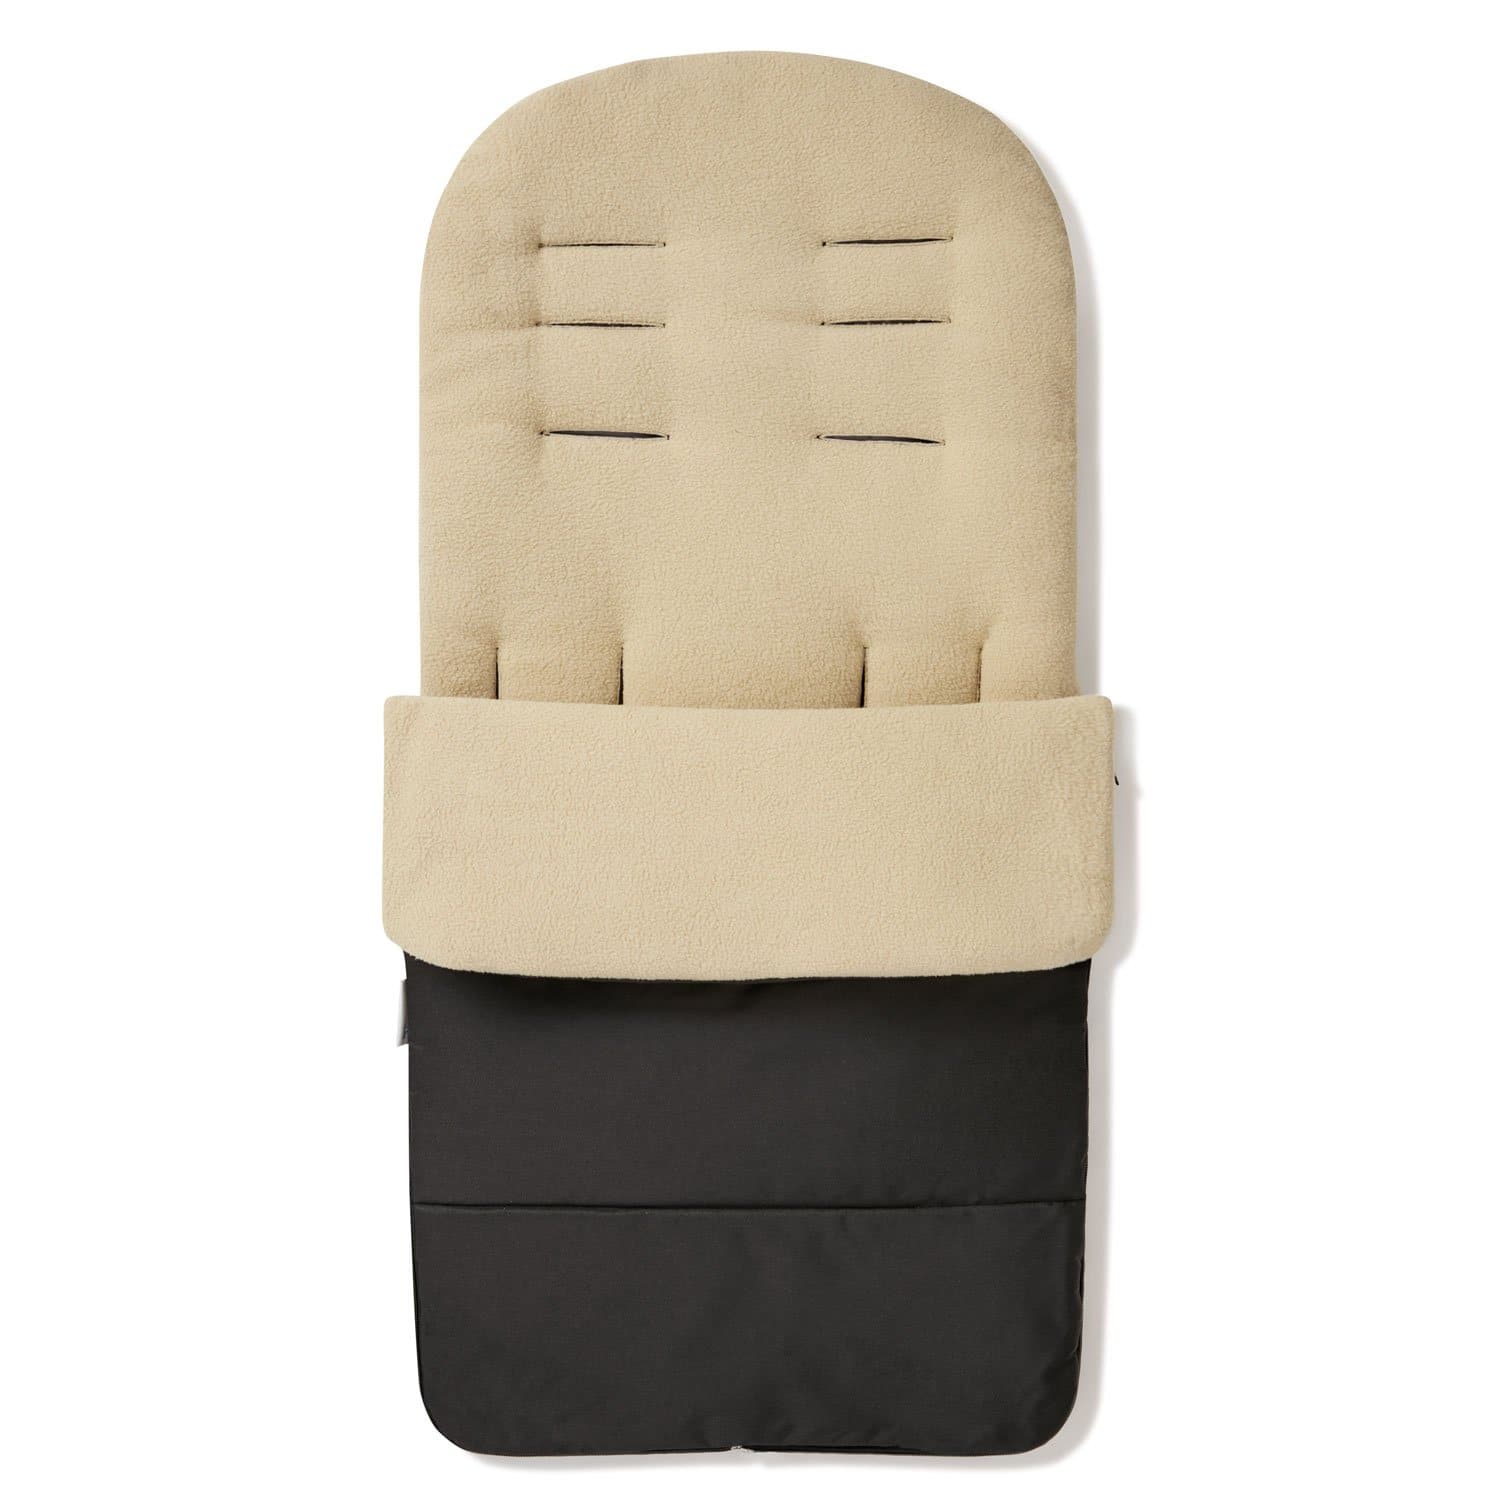 Premium Footmuff / Cosy Toes Compatible with Quinny - Desert Sand / Fits All Models | For Your Little One